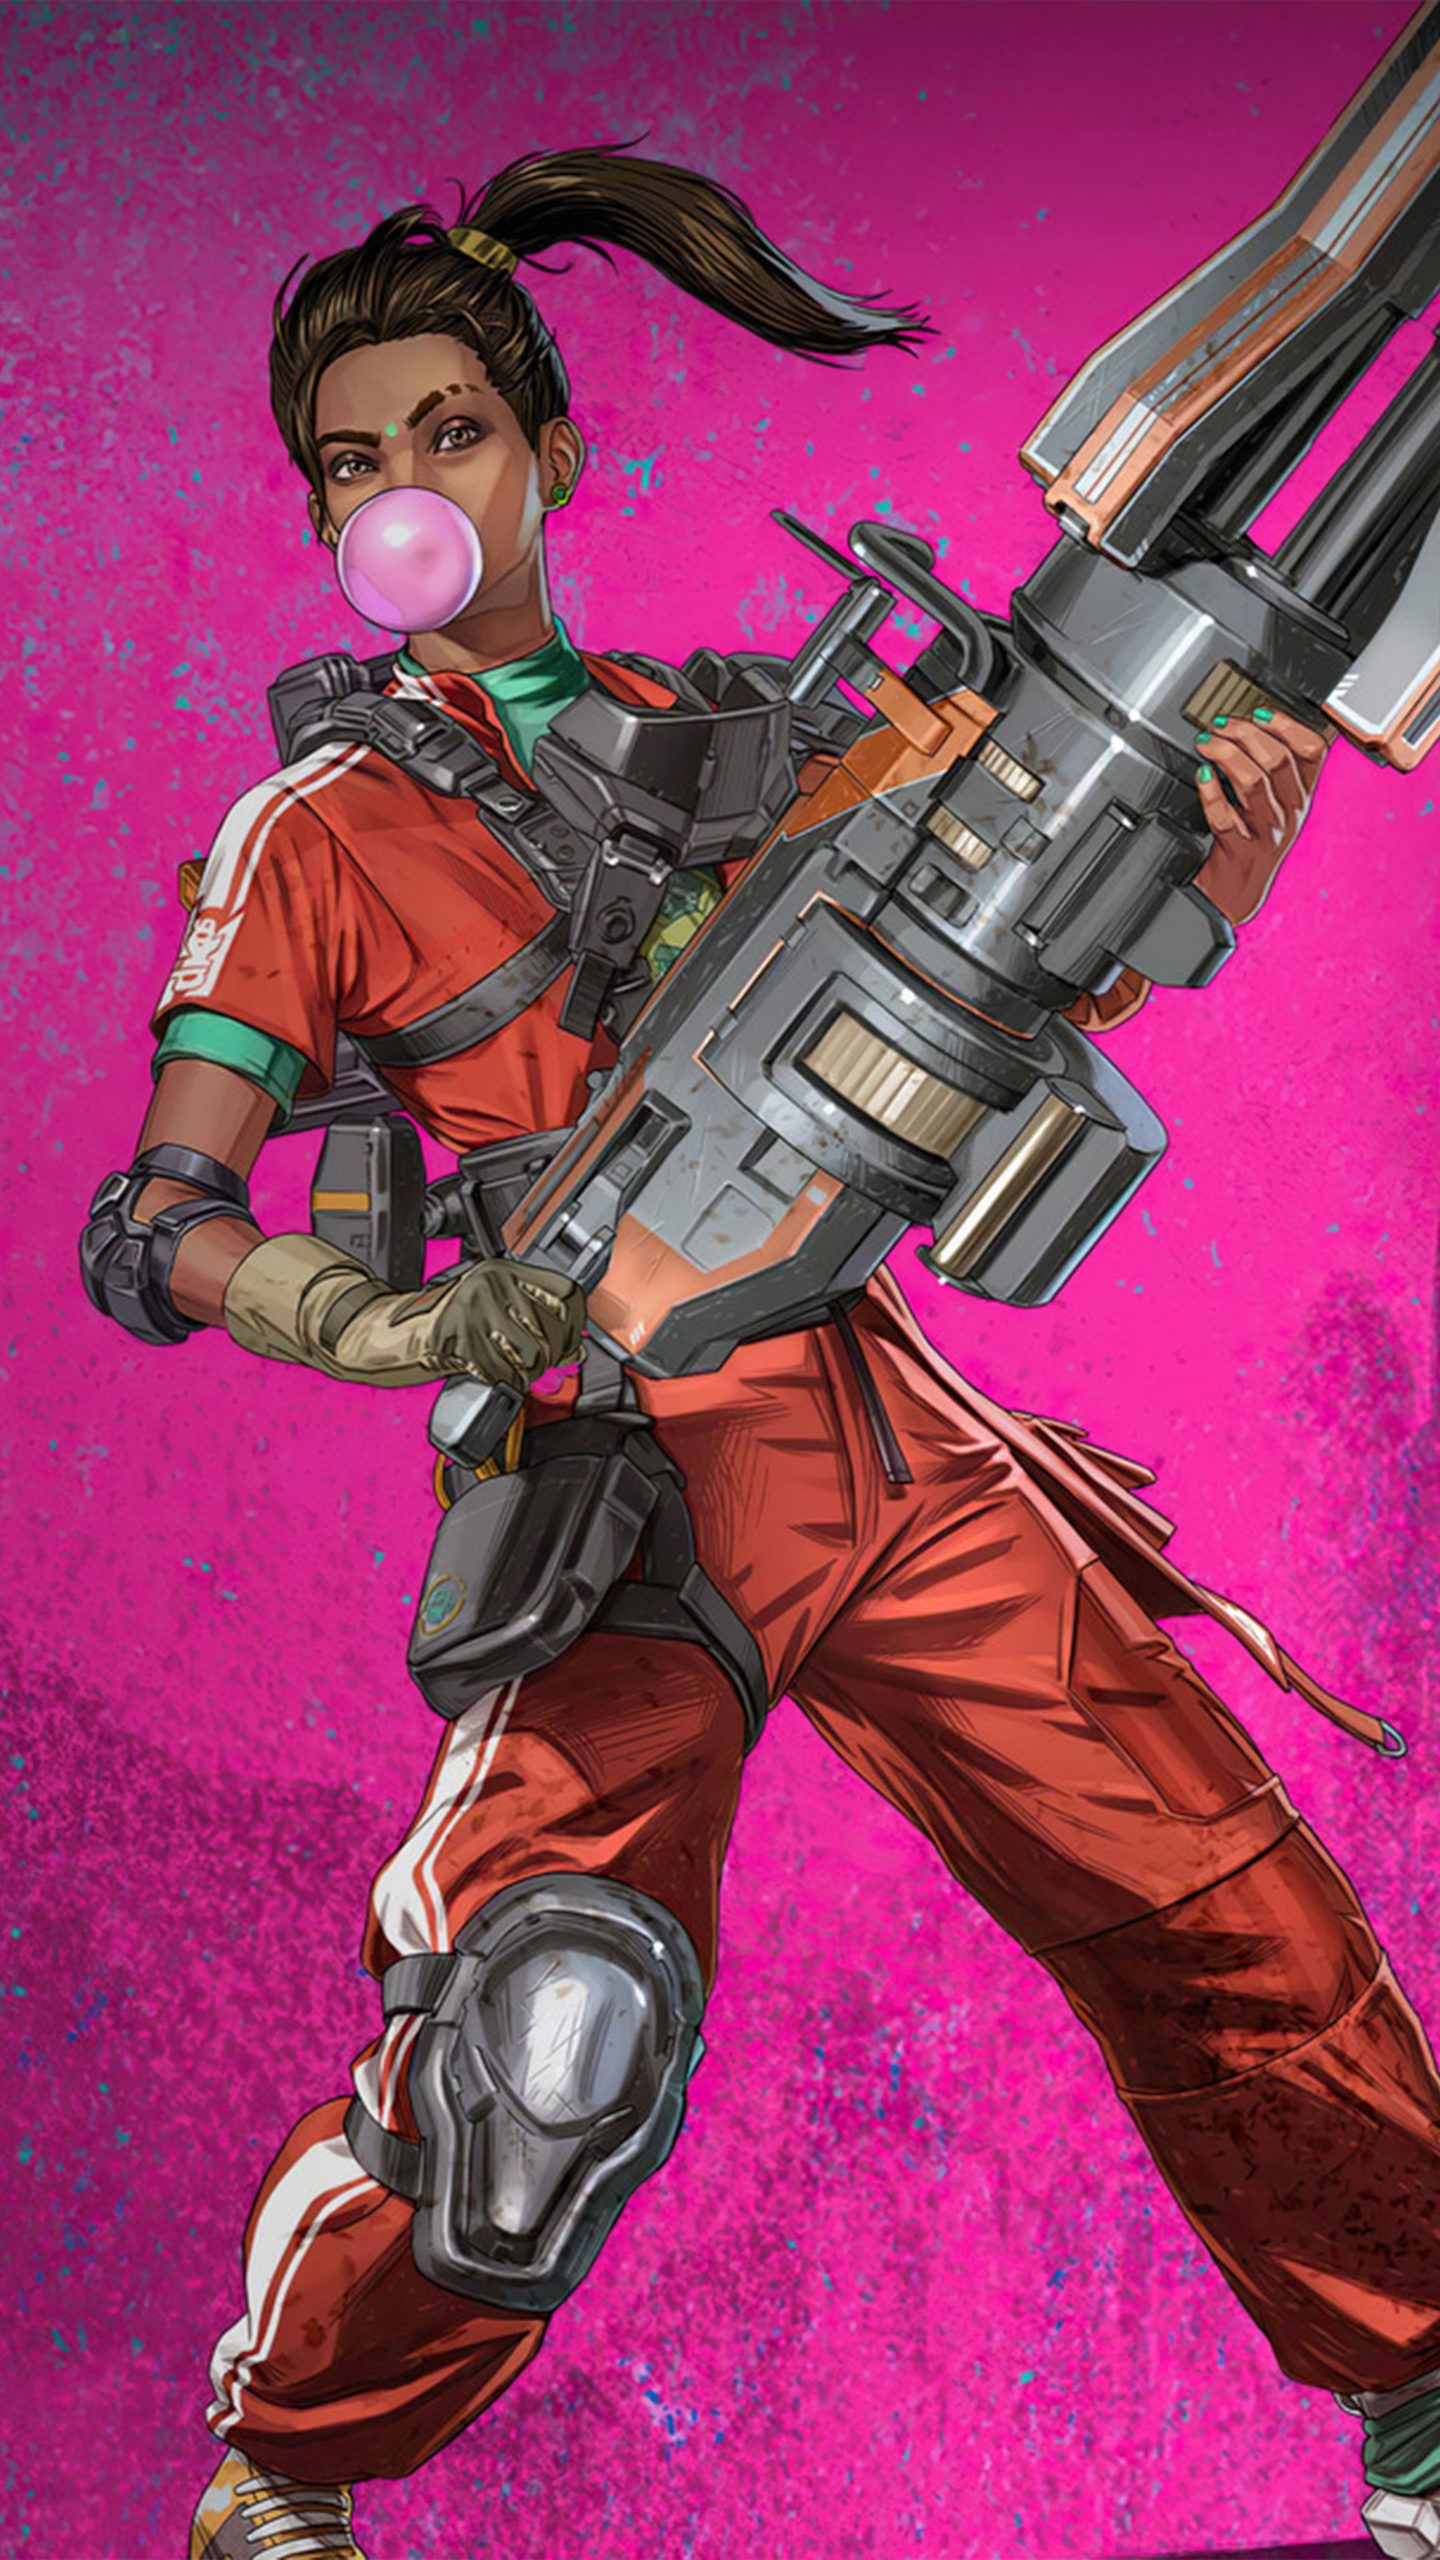 Apex Legends: Rampart, Armed with a mobile minigun with one high-capacity magazine. 1440x2560 HD Wallpaper.